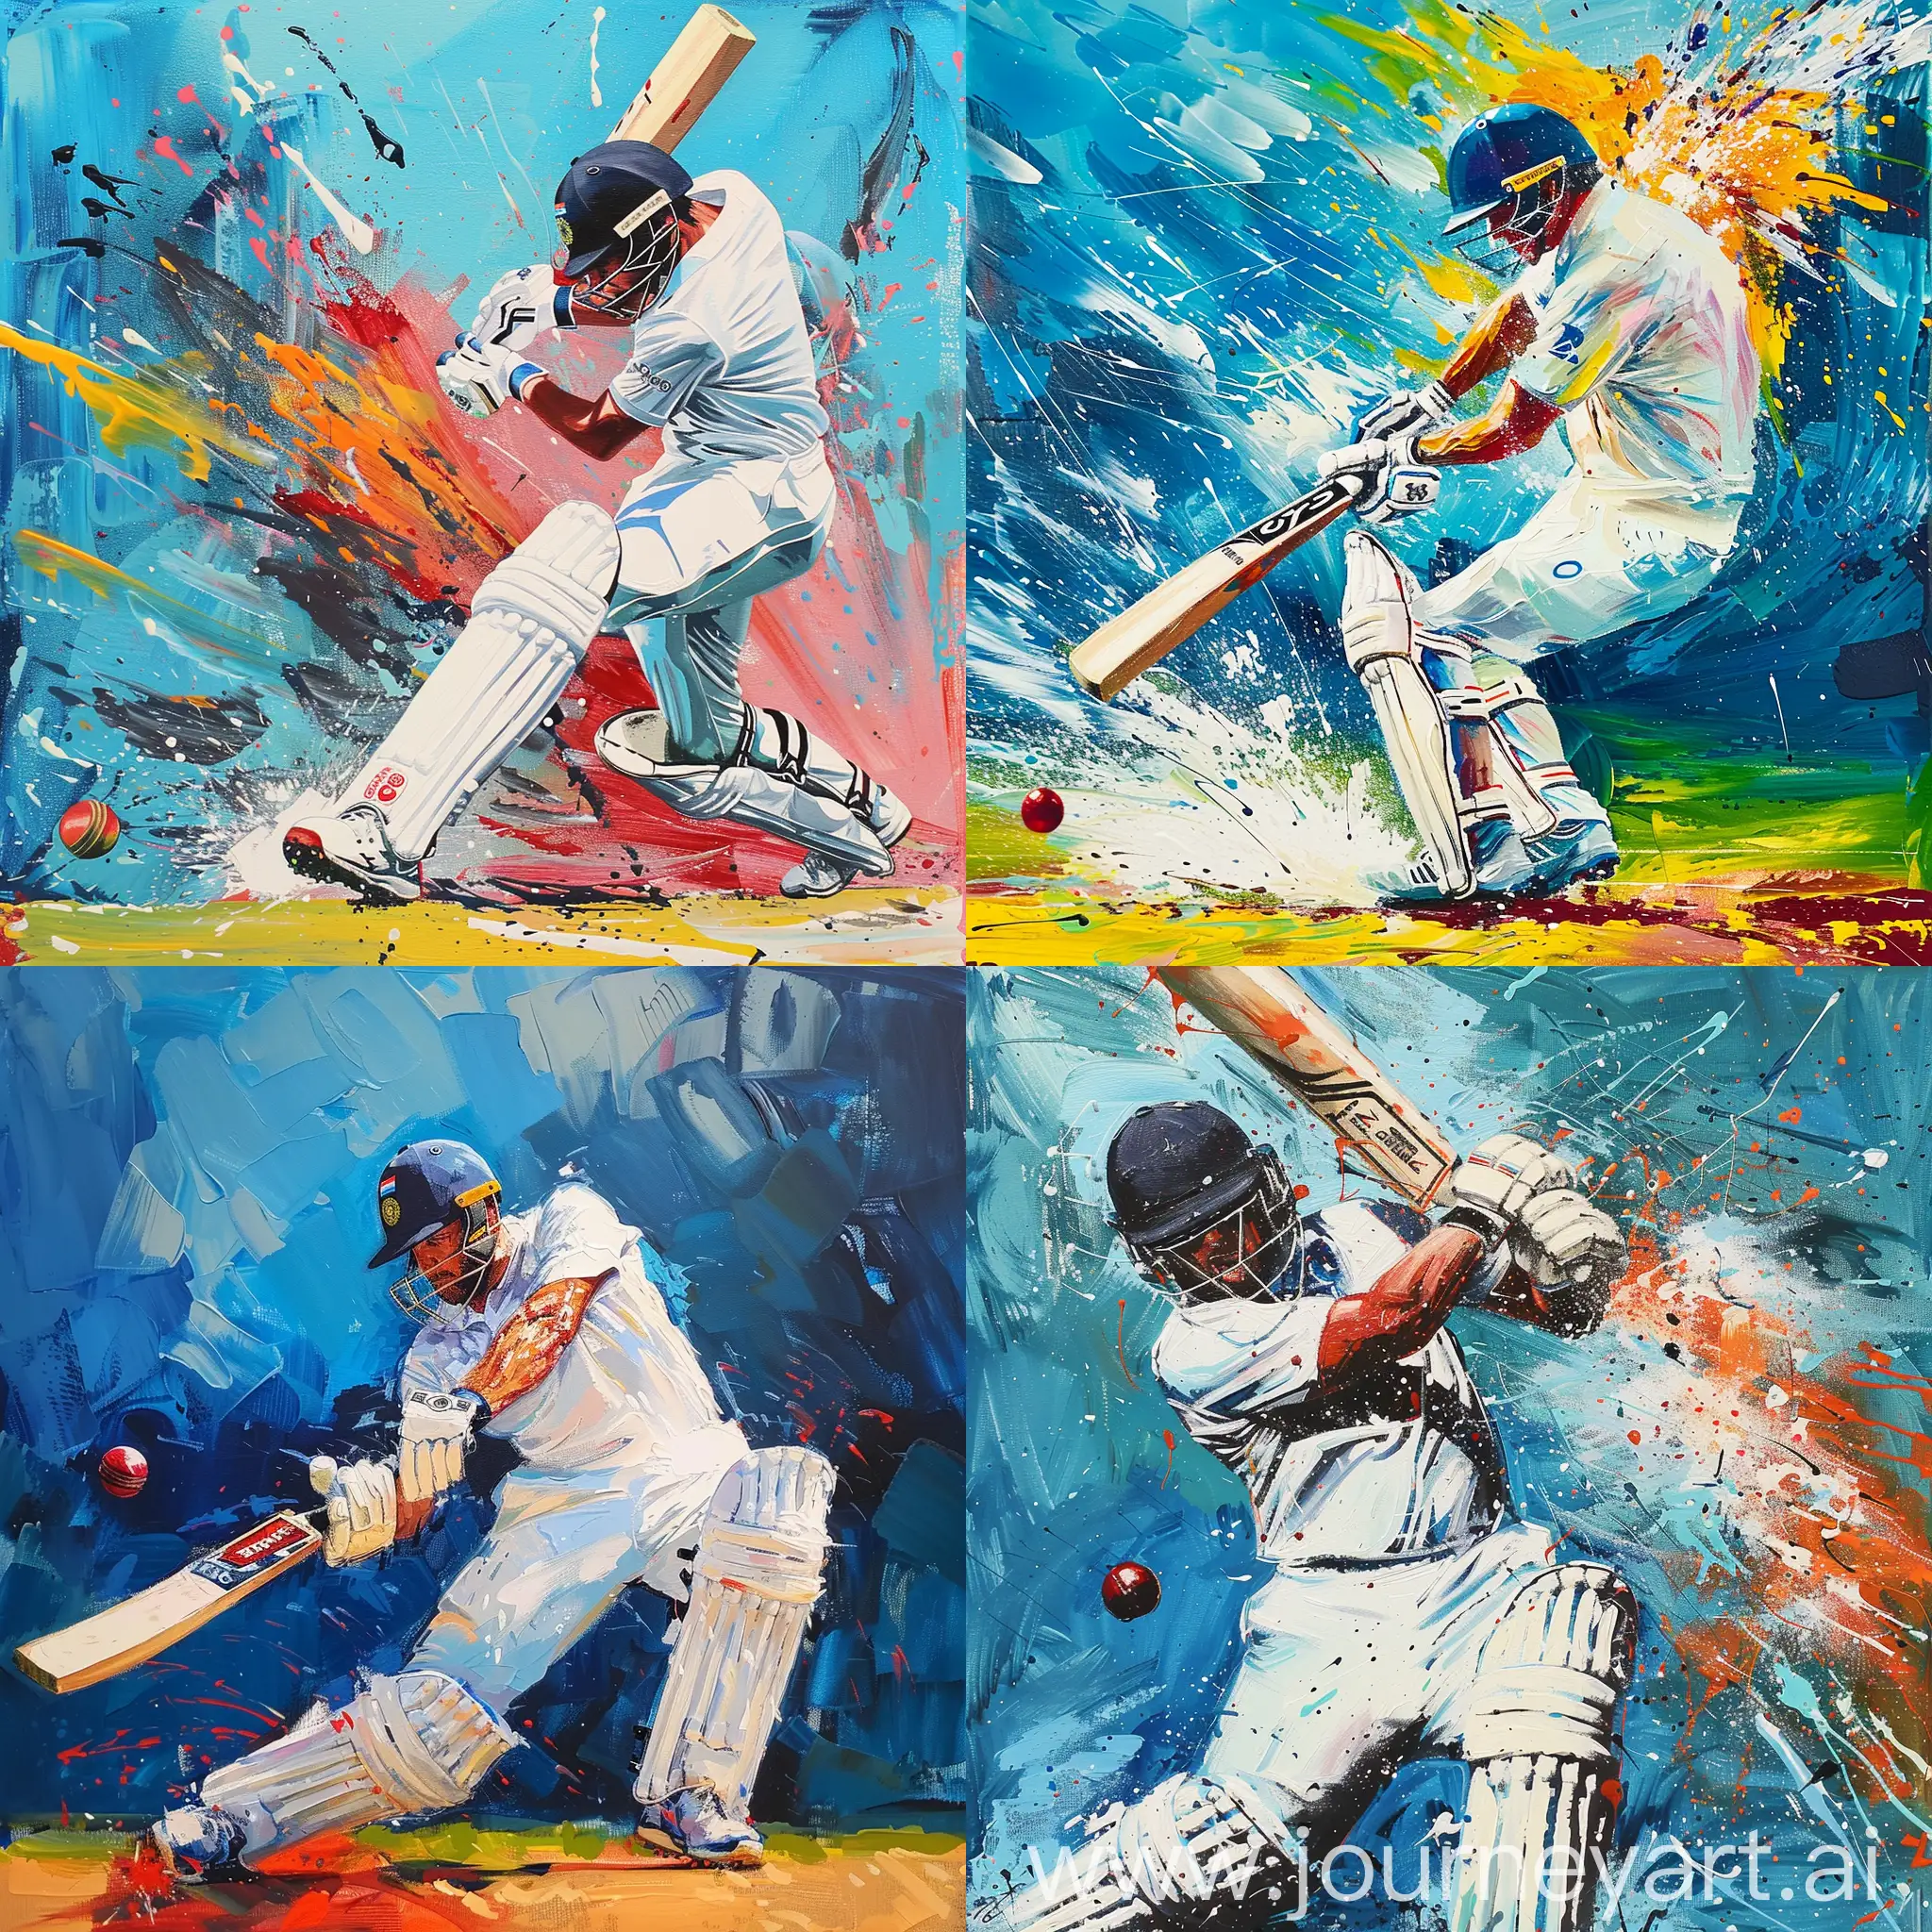 Dynamic-Cricket-Player-in-Action-on-a-Vibrant-Cover-Drive